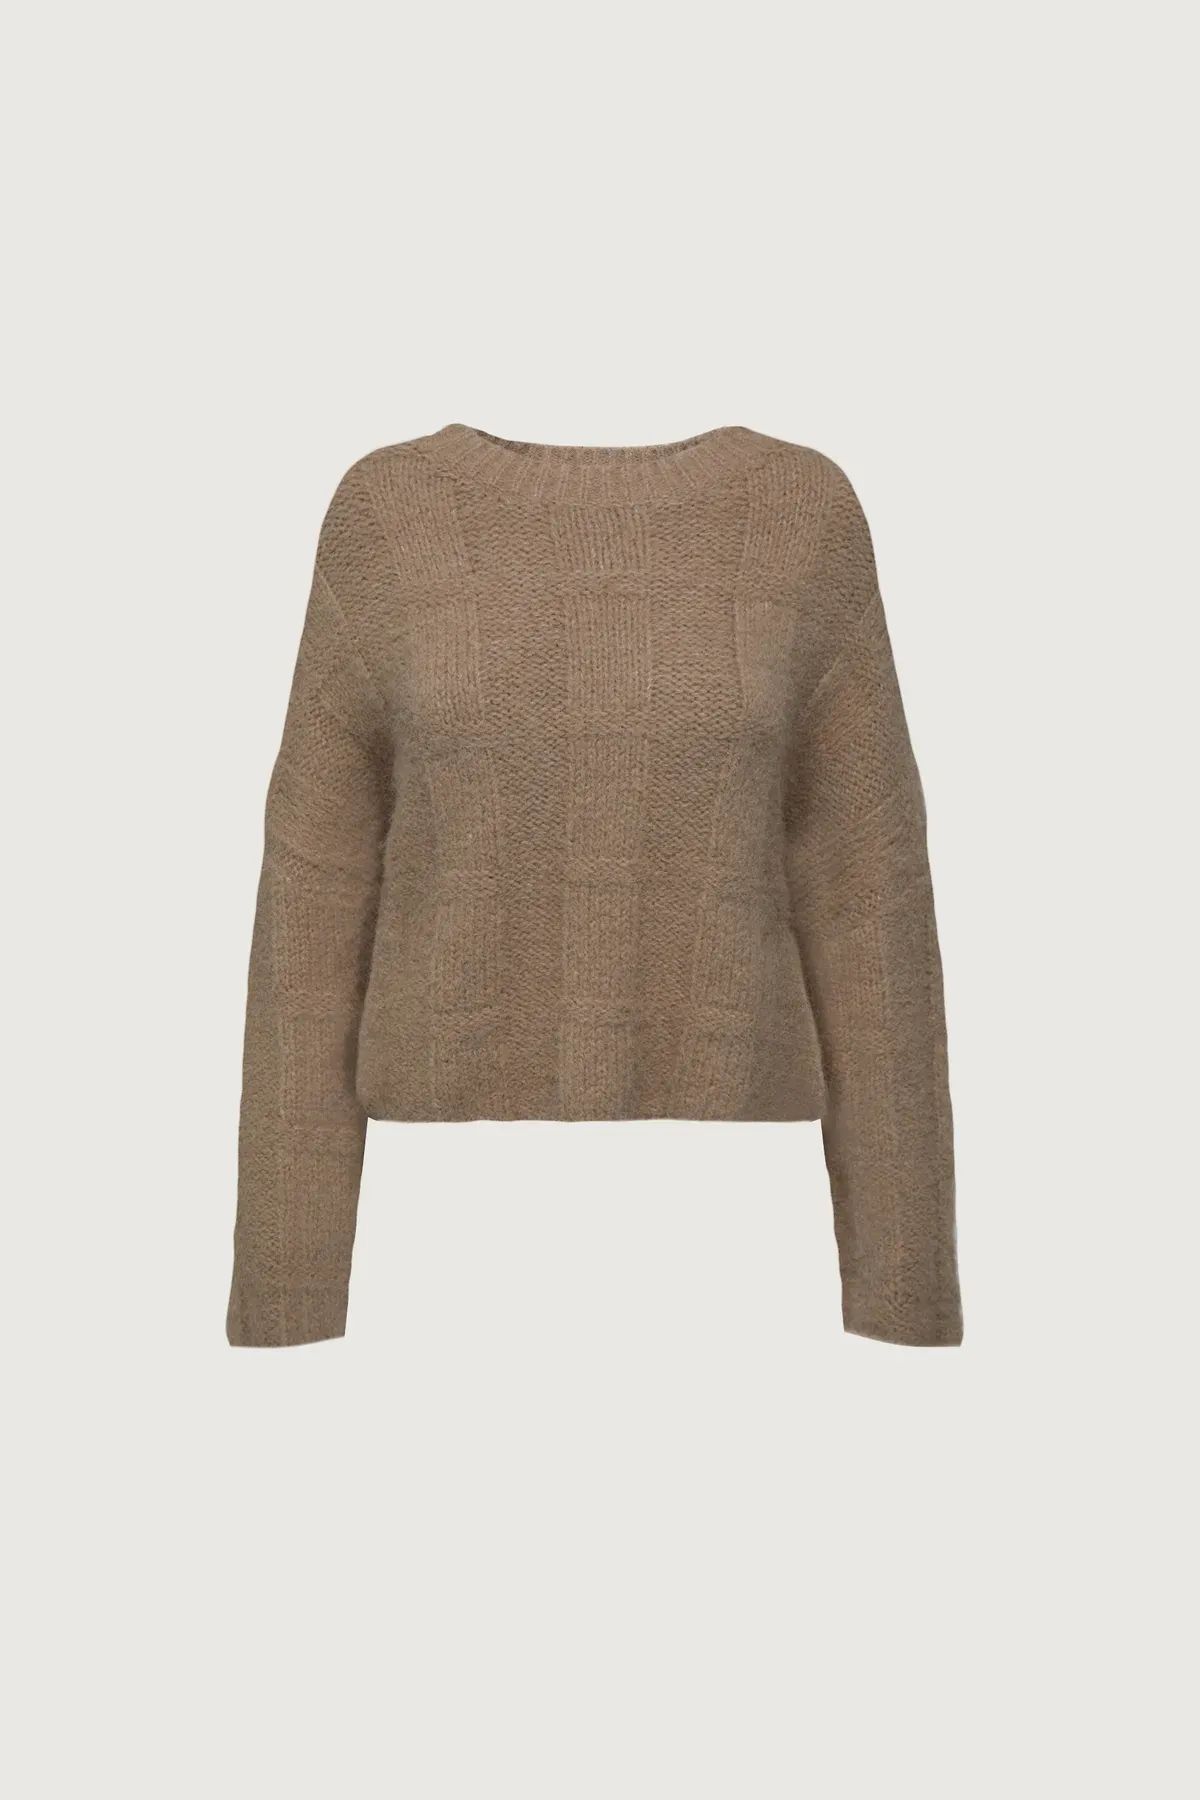 FUZZY RIBBED SWEATER | OAK + FORT